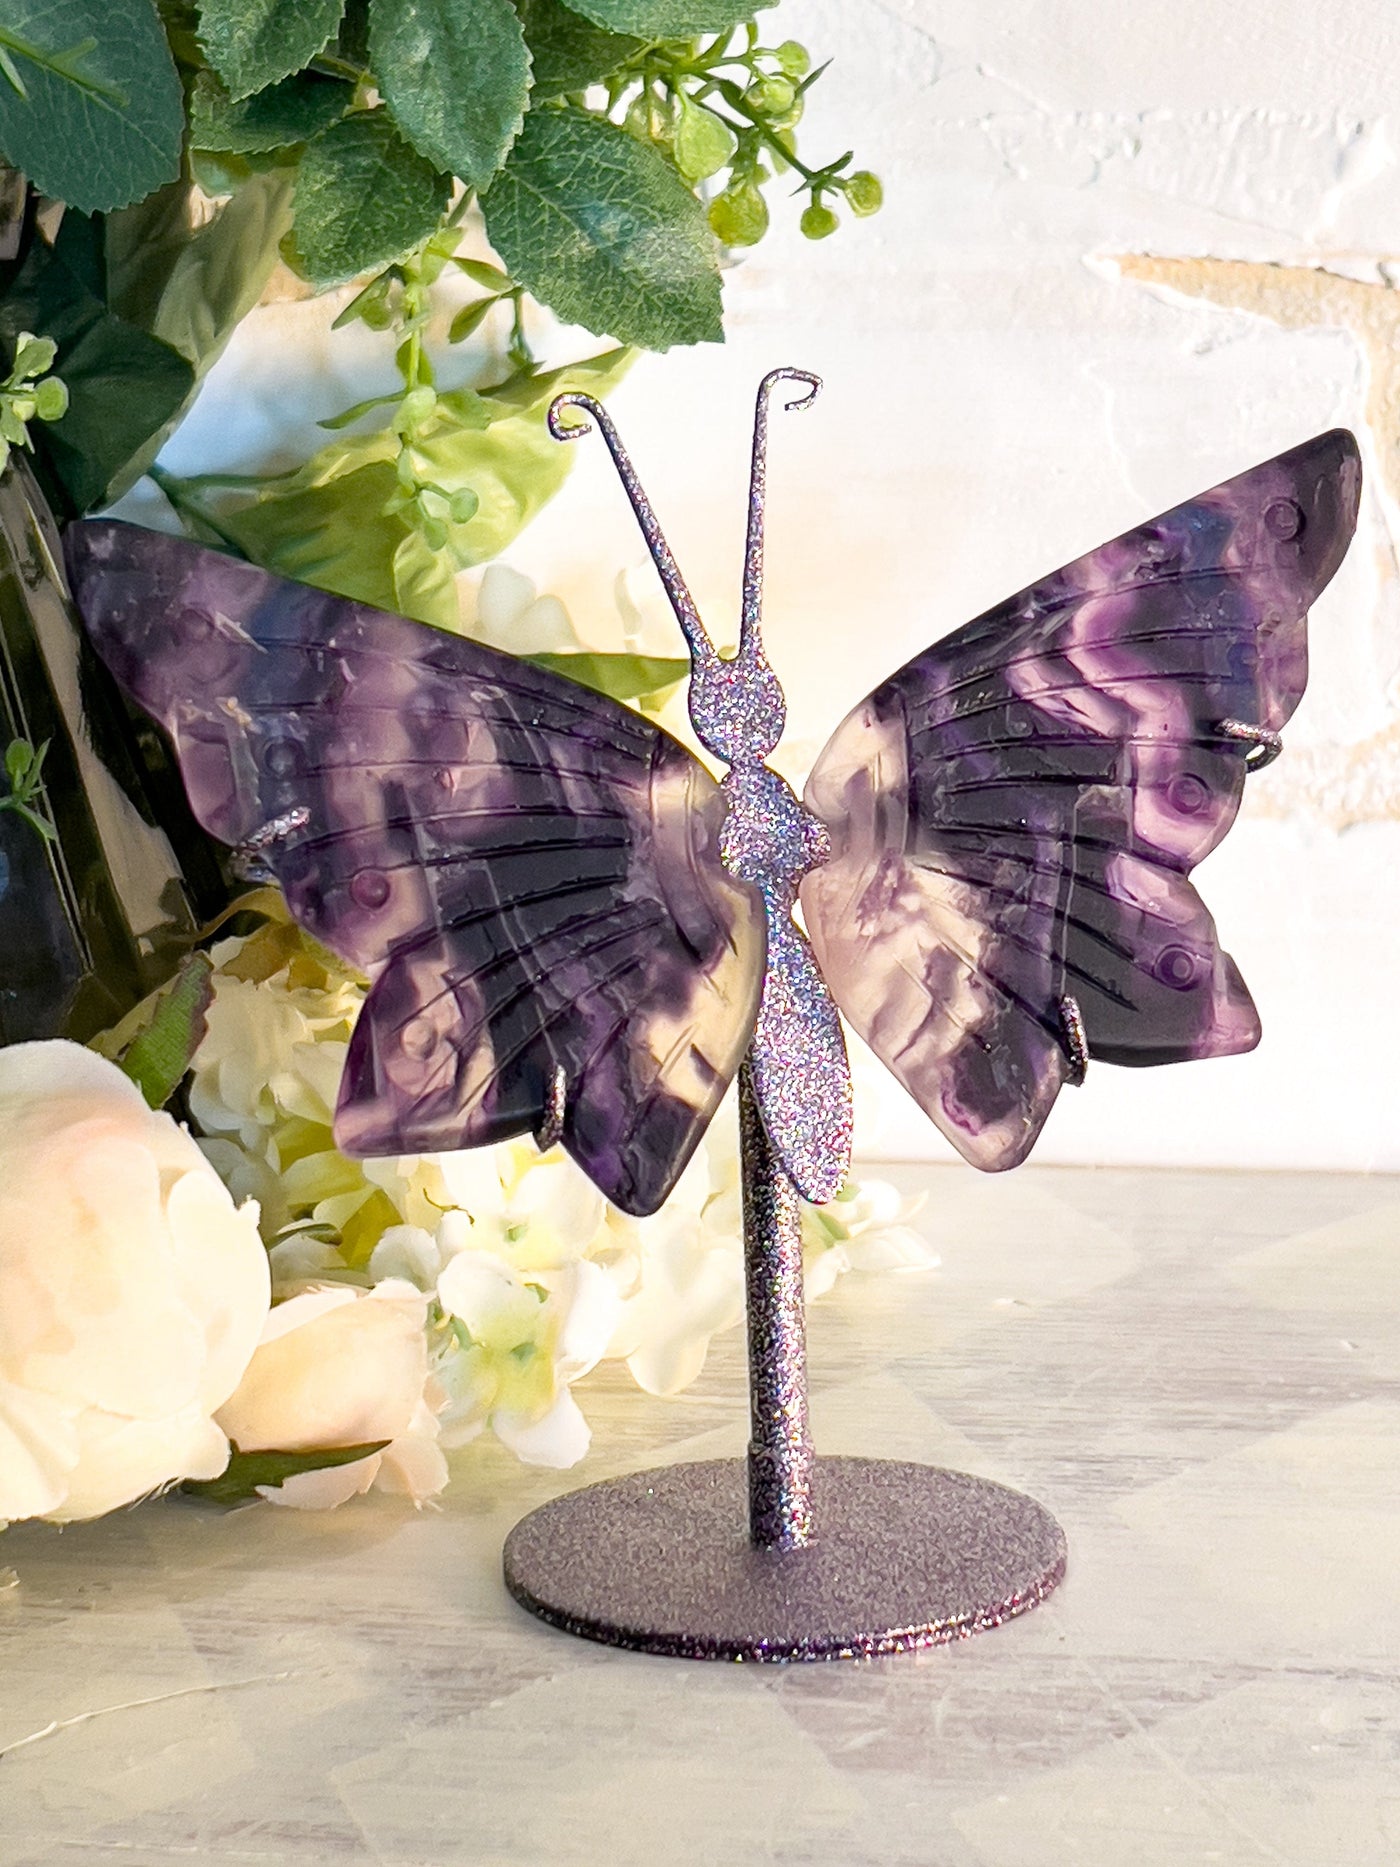 PURPLE FLUORITE BUTTERFLY WINGS ON SHIMMERY STAND Revive In Style Vintage Furniture Painted Refinished Redesign Beautiful One of a Kind Artistic Antique Unique Home Decor Interior Design French Country Shabby Chic Cottage Farmhouse Grandmillenial Coastal Chalk Paint Metallic Glam Eclectic Quality Dovetailed Rustic Furniture Painter Pinterest Bedroom Living Room Entryway Kitchen Home Trends House Styles Decorating ideas